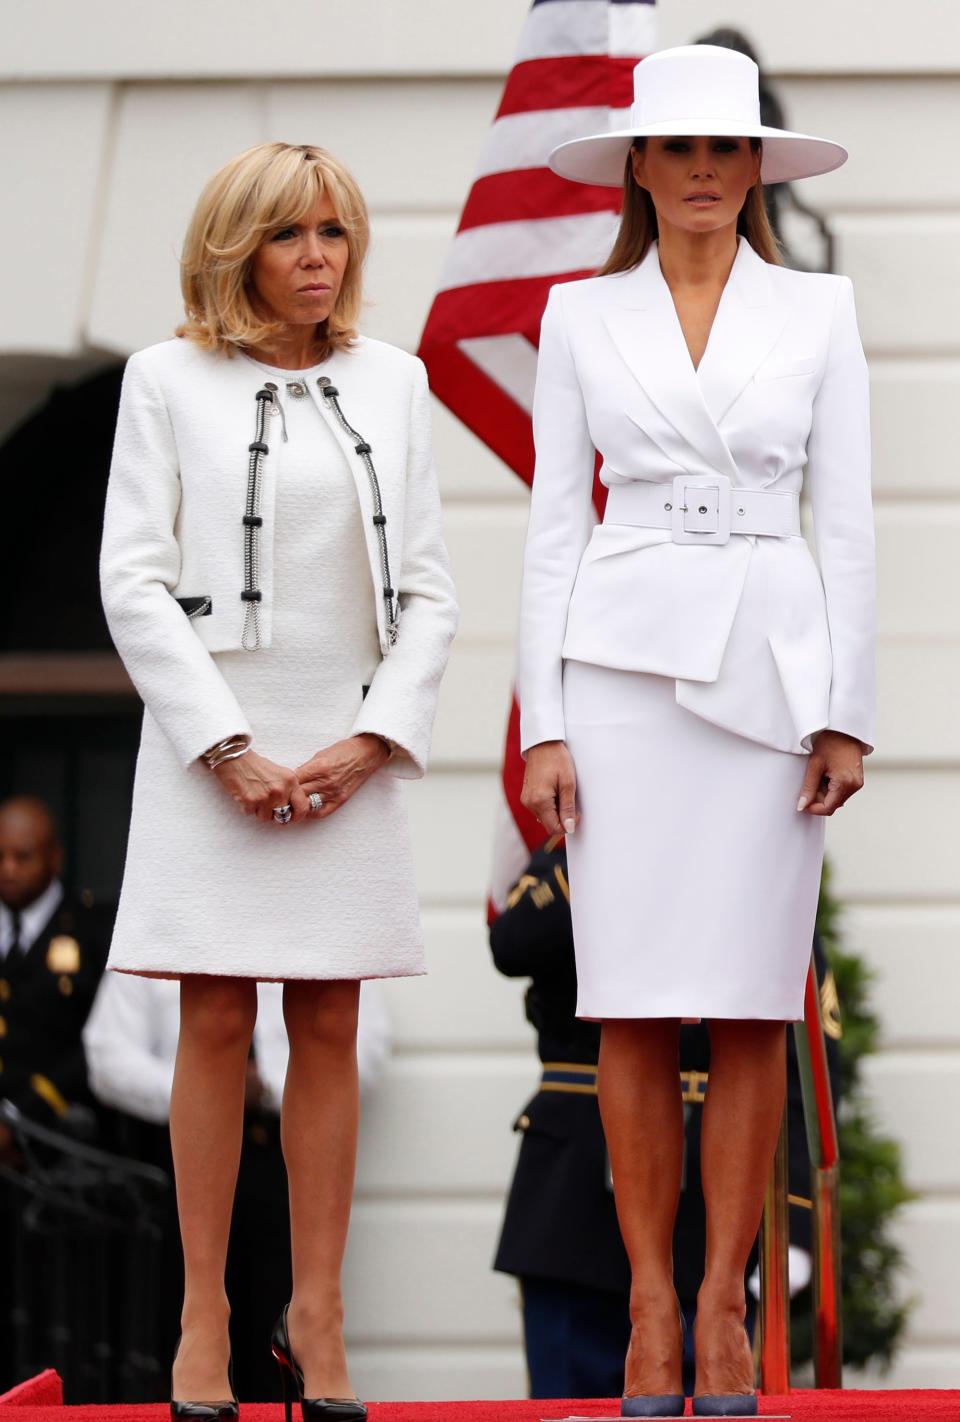 Melania Trump and Brigitte Macron in white outfits standing in front of the White House